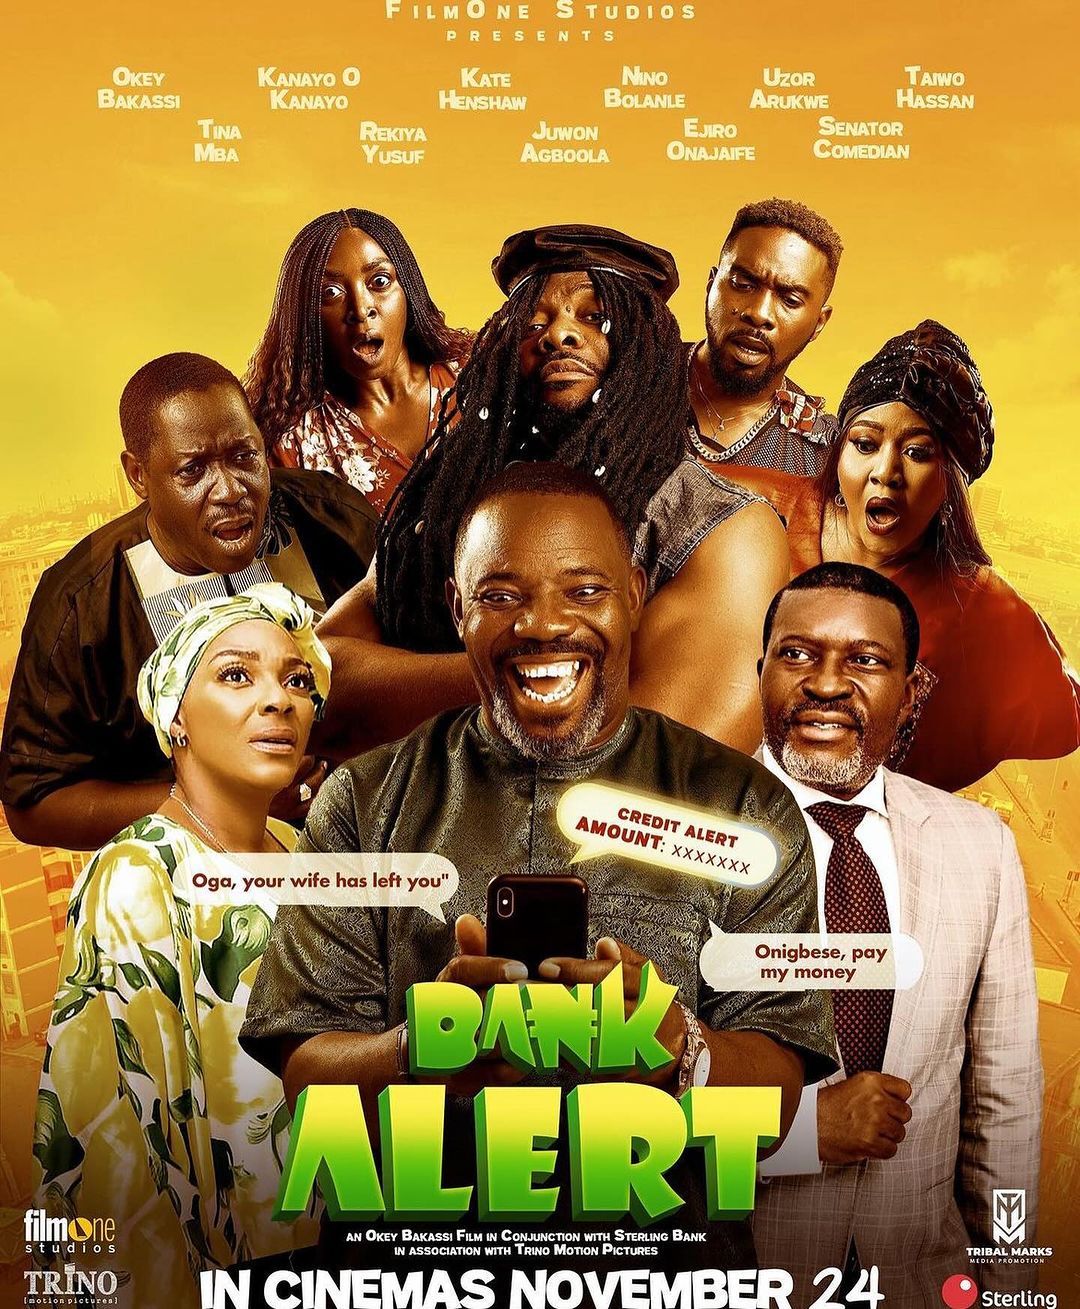 396727498 18119029516321845 8955572945733033595 n - Amazing Nollywood Box Office Titles on our Radar, This November!